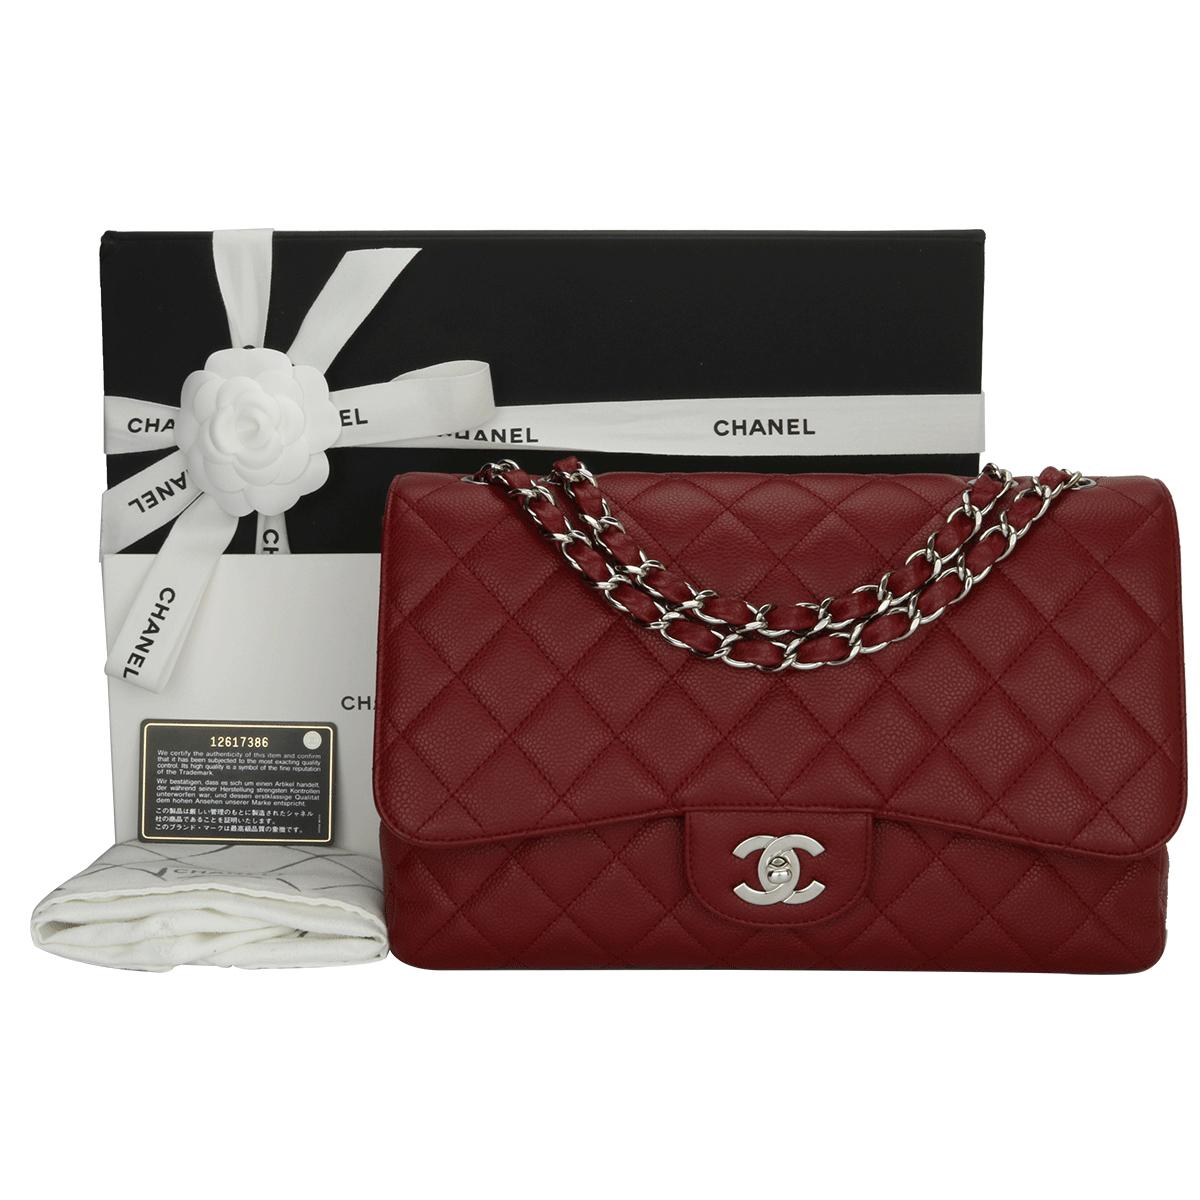 Authentic CHANEL Classic Single Flap Jumbo Raspberry Red Caviar with Silver Hardware 2009.

This stunning bag is in mint condition, the bag still holds its original shape and the hardware is still very shiny.

Exterior Condition: Mint condition, the